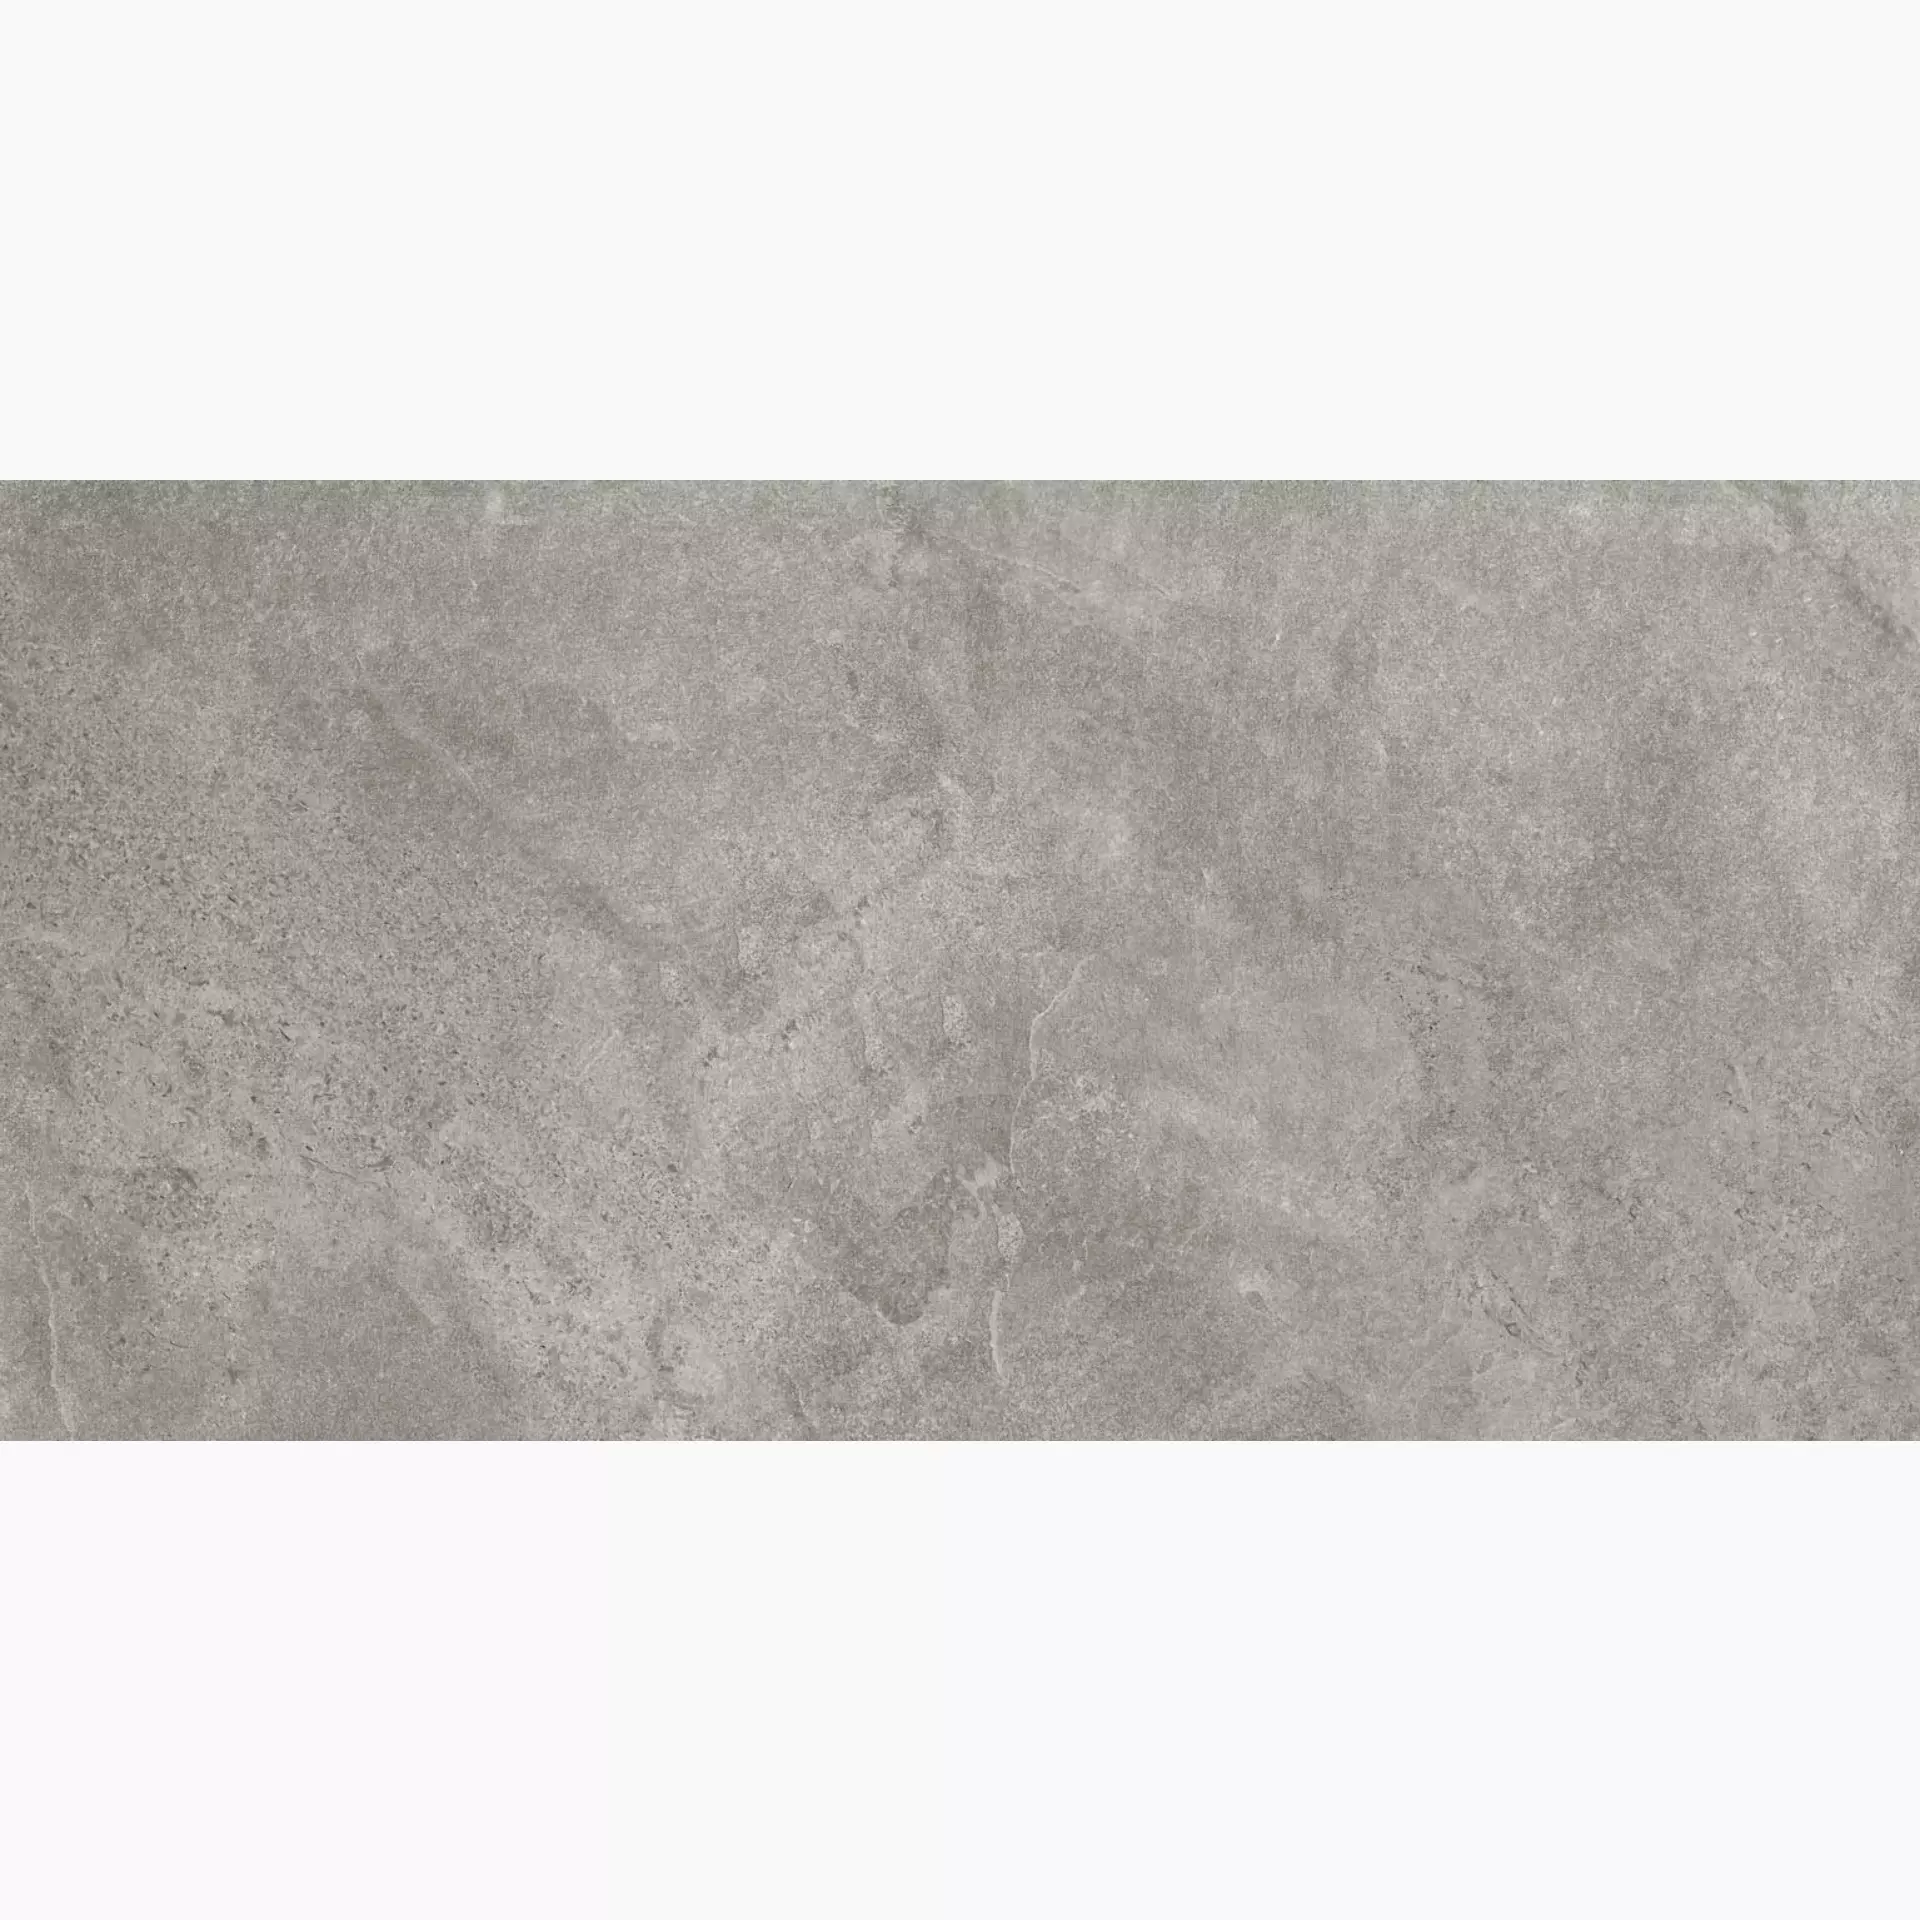 ABK Monolith Greige Naturale PF60001803 60x120cm rectified 8,5mm